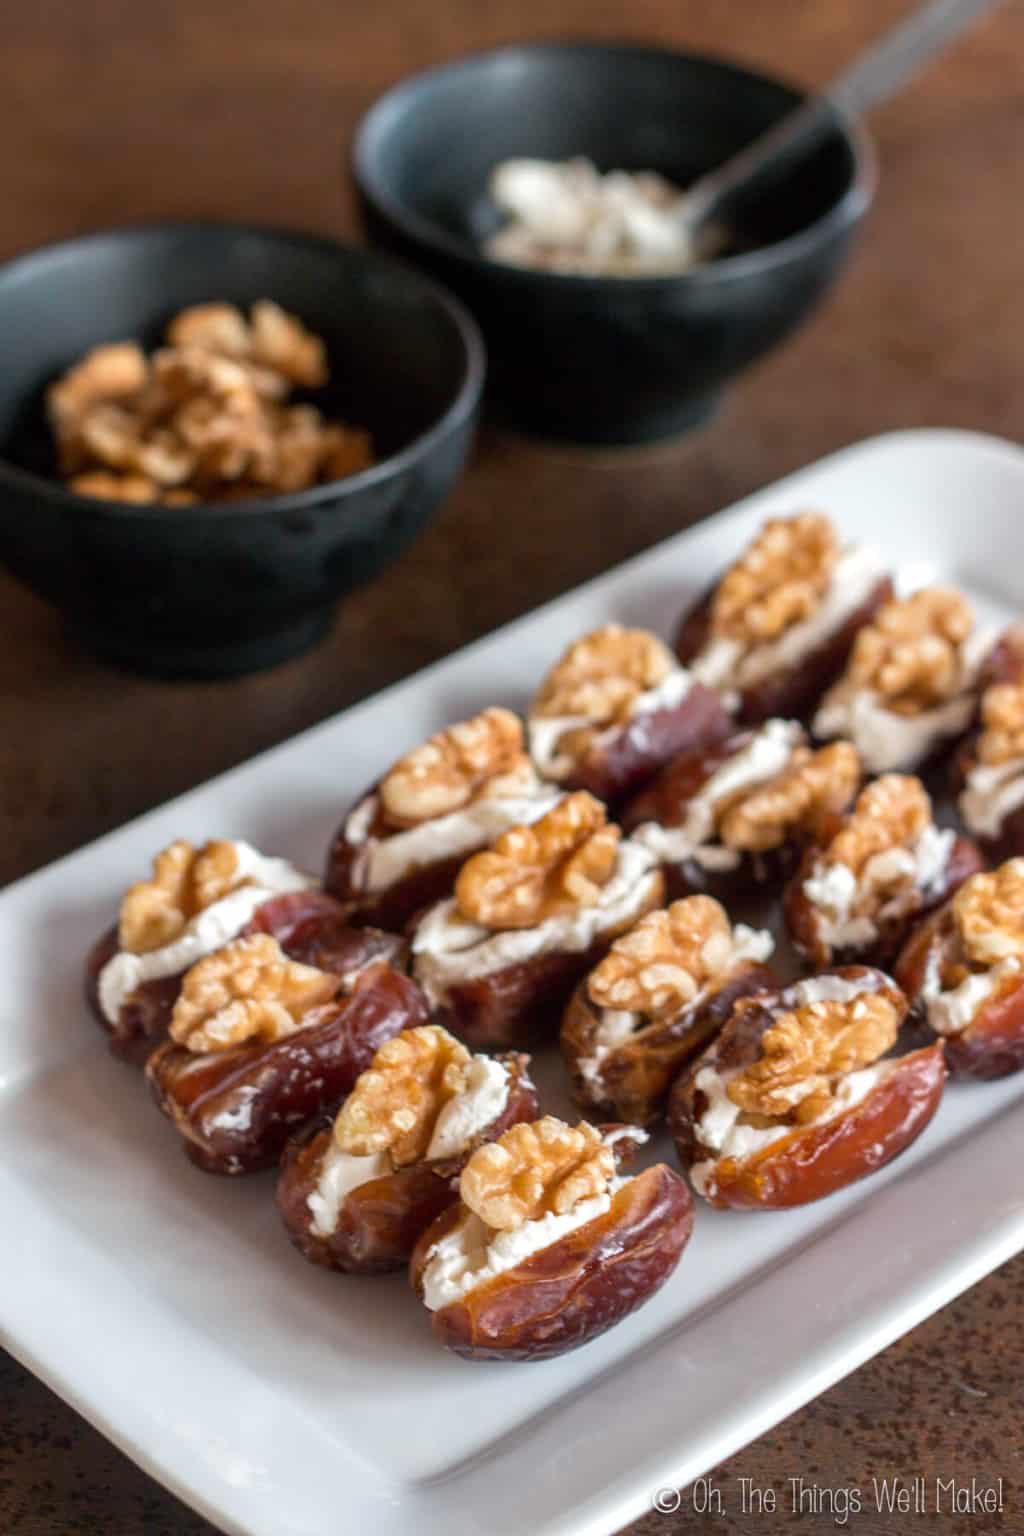 A rectangular plate with sixteen dates laid out. Dates are cut open in the middl, and filled with cream cheese and topped with walnuts. Behind the plate are two bowls, one filled with halved walnuts and another with cream cheese.